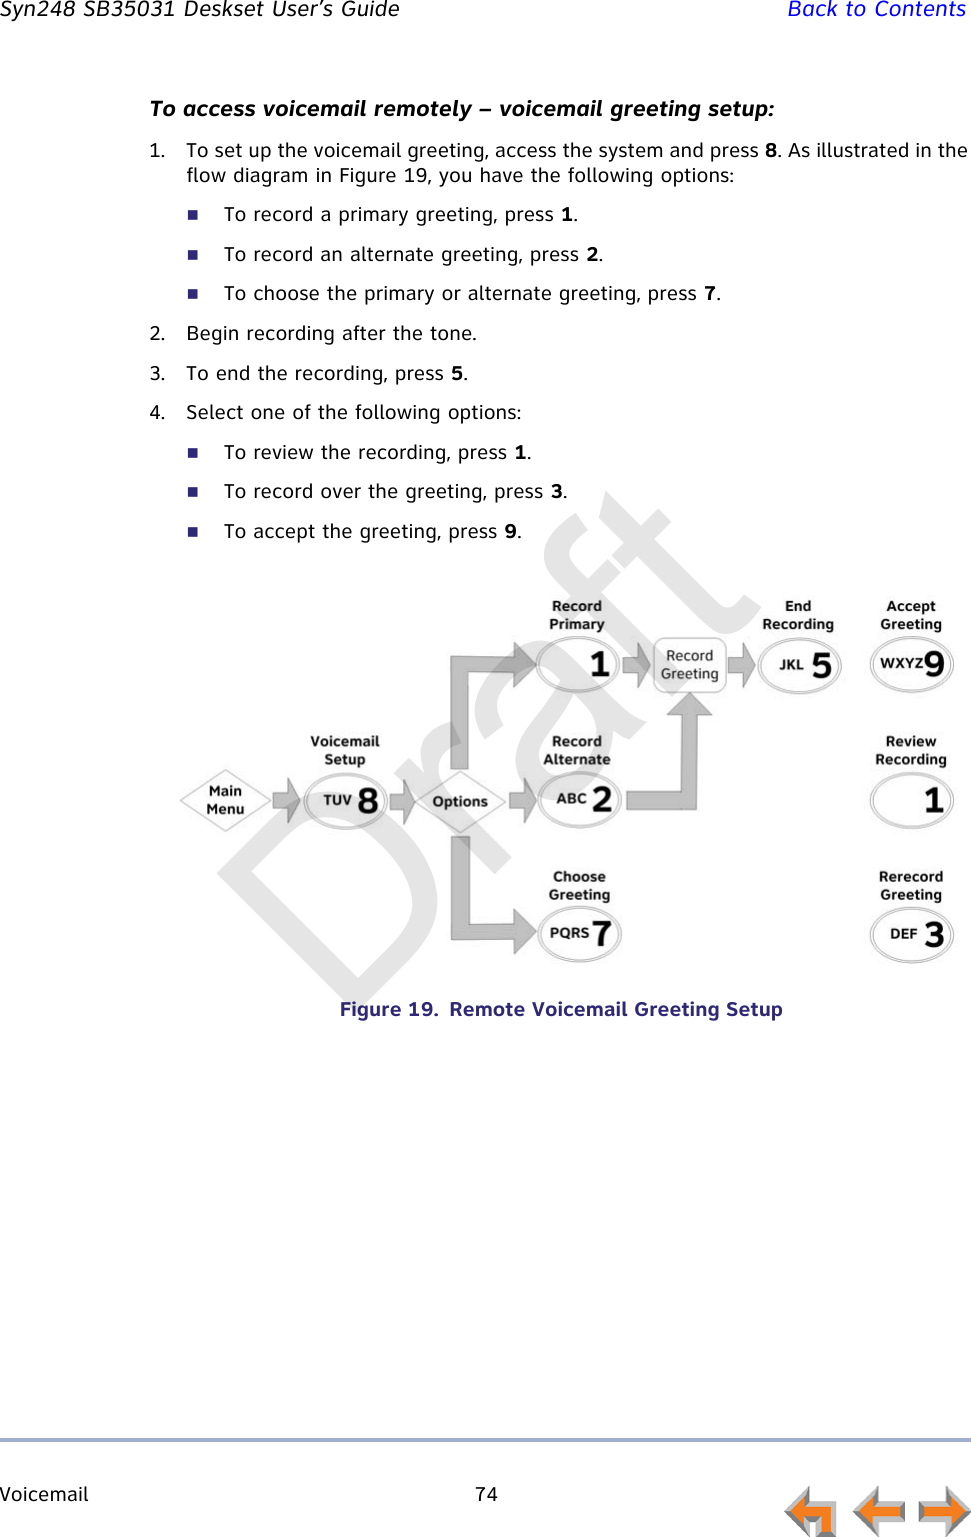 Voicemail 74         Syn248 SB35031 Deskset User’s Guide Back to ContentsTo access voicemail remotely – voicemail greeting setup:1. To set up the voicemail greeting, access the system and press 8. As illustrated in the flow diagram in Figure 19, you have the following options:To record a primary greeting, press 1.To record an alternate greeting, press 2.To choose the primary or alternate greeting, press 7.2. Begin recording after the tone.3. To end the recording, press 5.4. Select one of the following options:To review the recording, press 1.To record over the greeting, press 3.To accept the greeting, press 9.Figure 19.  Remote Voicemail Greeting SetupDraft